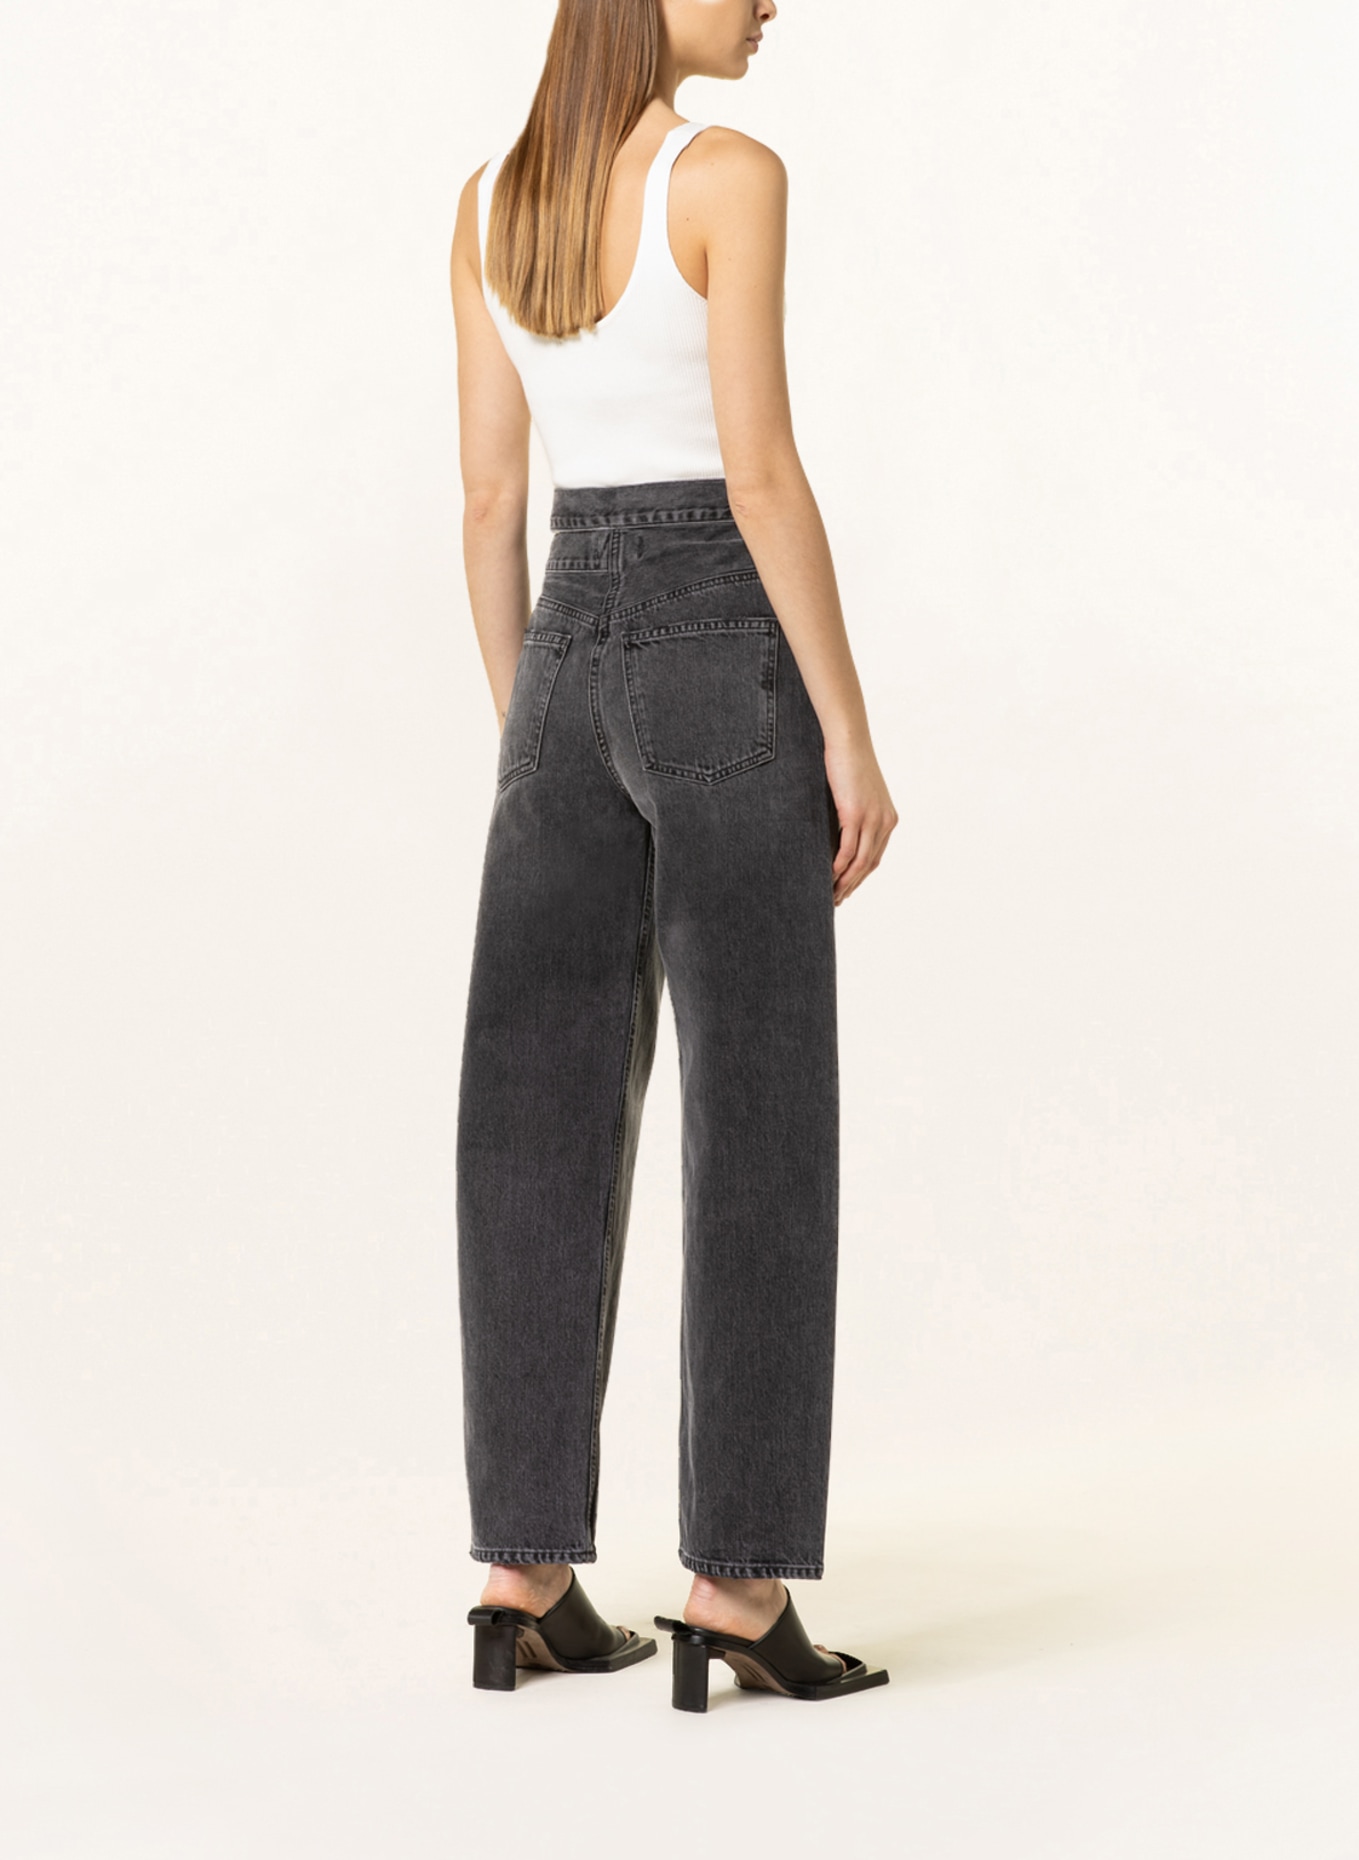 AGOLDE Straight Jeans JEAN mit Cut-out, Farbe: Conduct washed black (Bild 3)